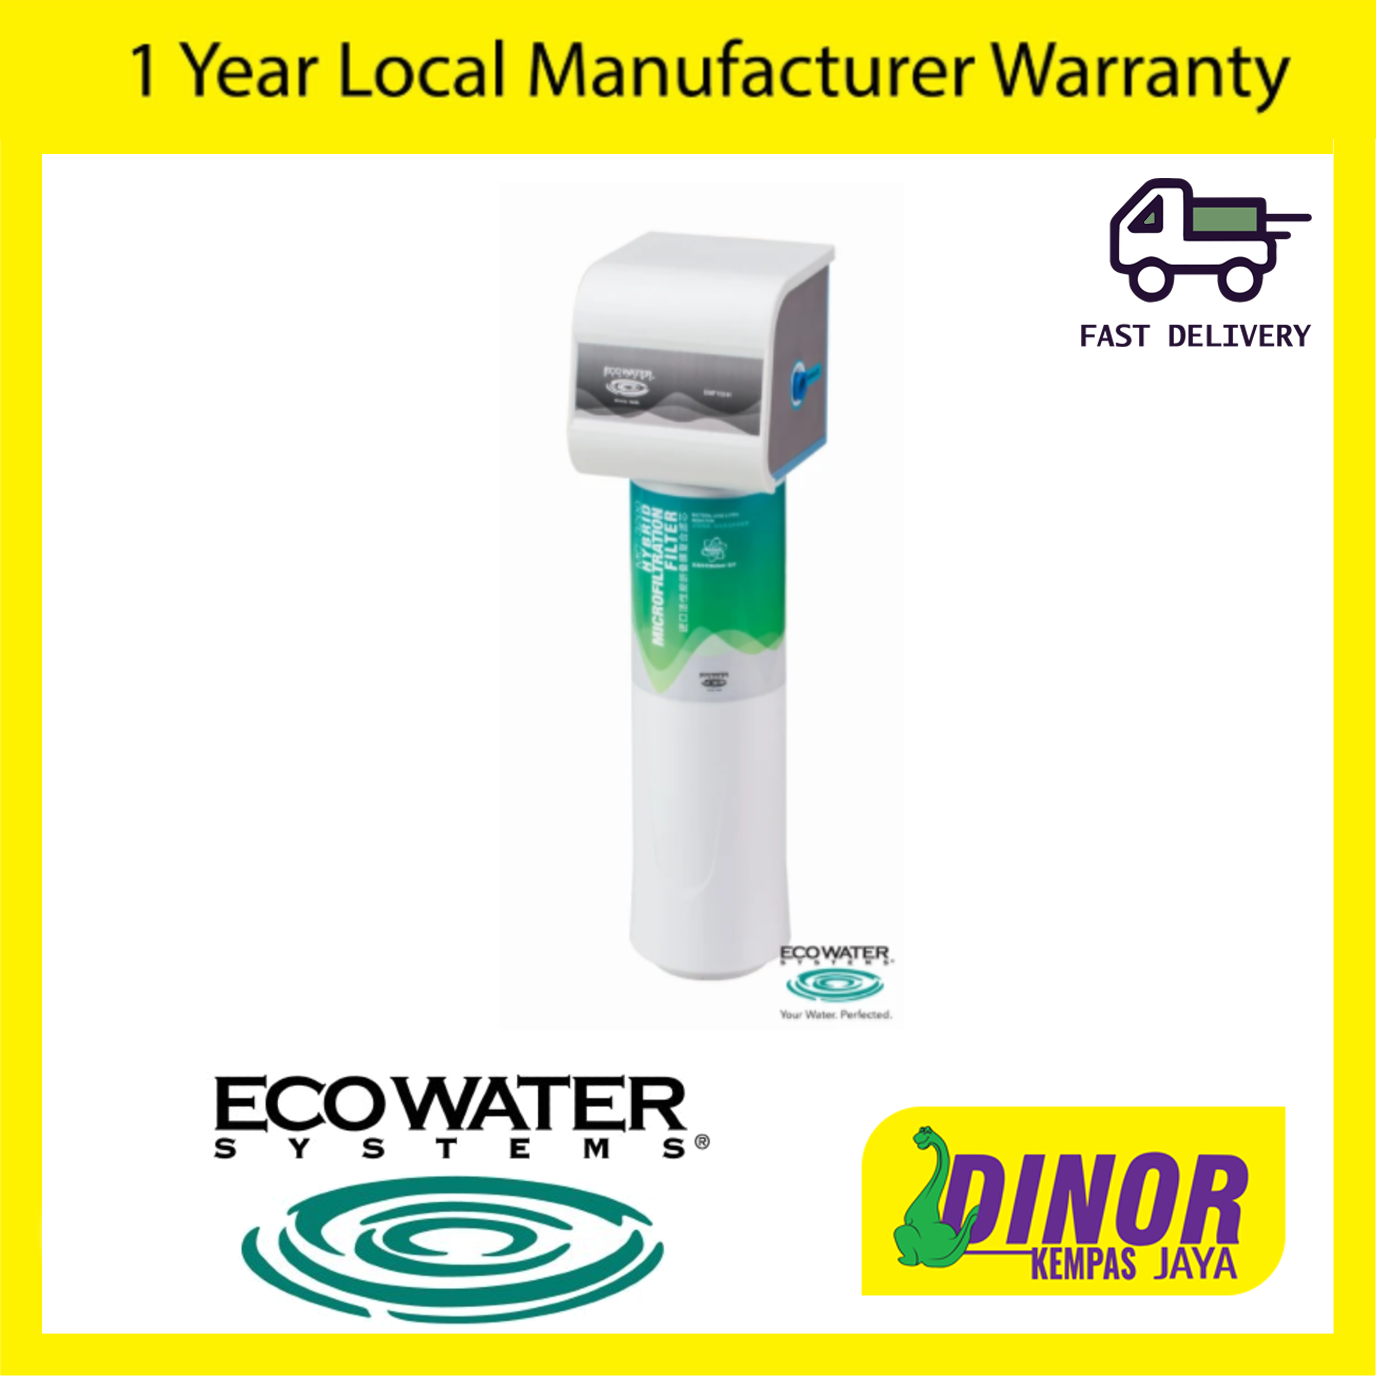 ECOWATER EMF110-H Drinking Water Filtration System